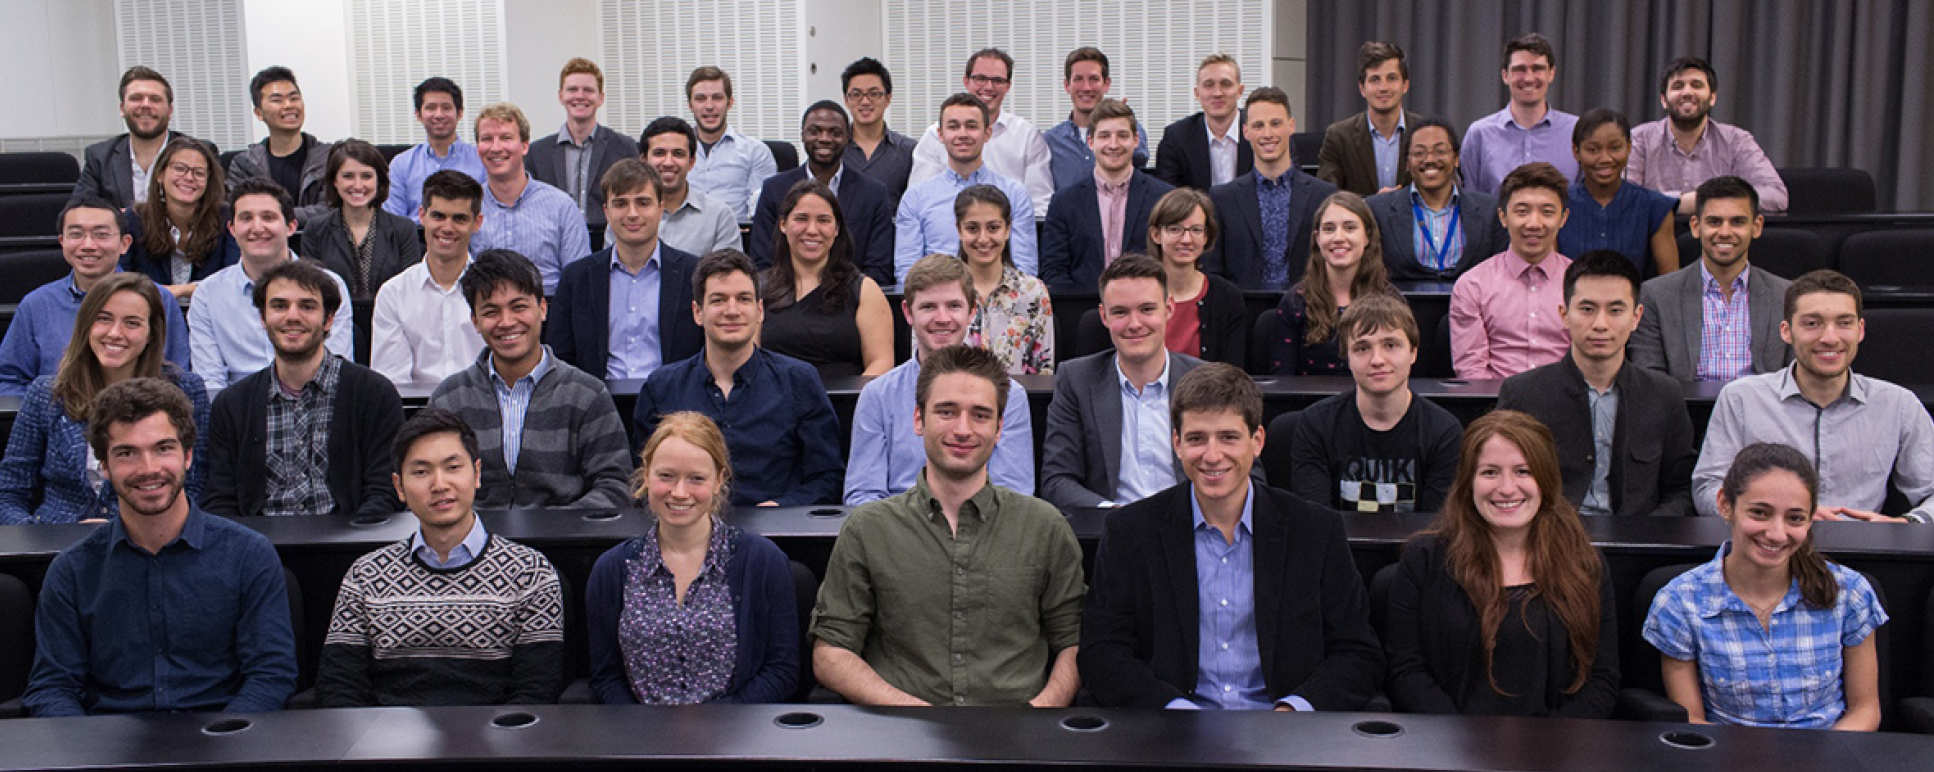 MSc in Sustainable Energy Futures Class of 2015